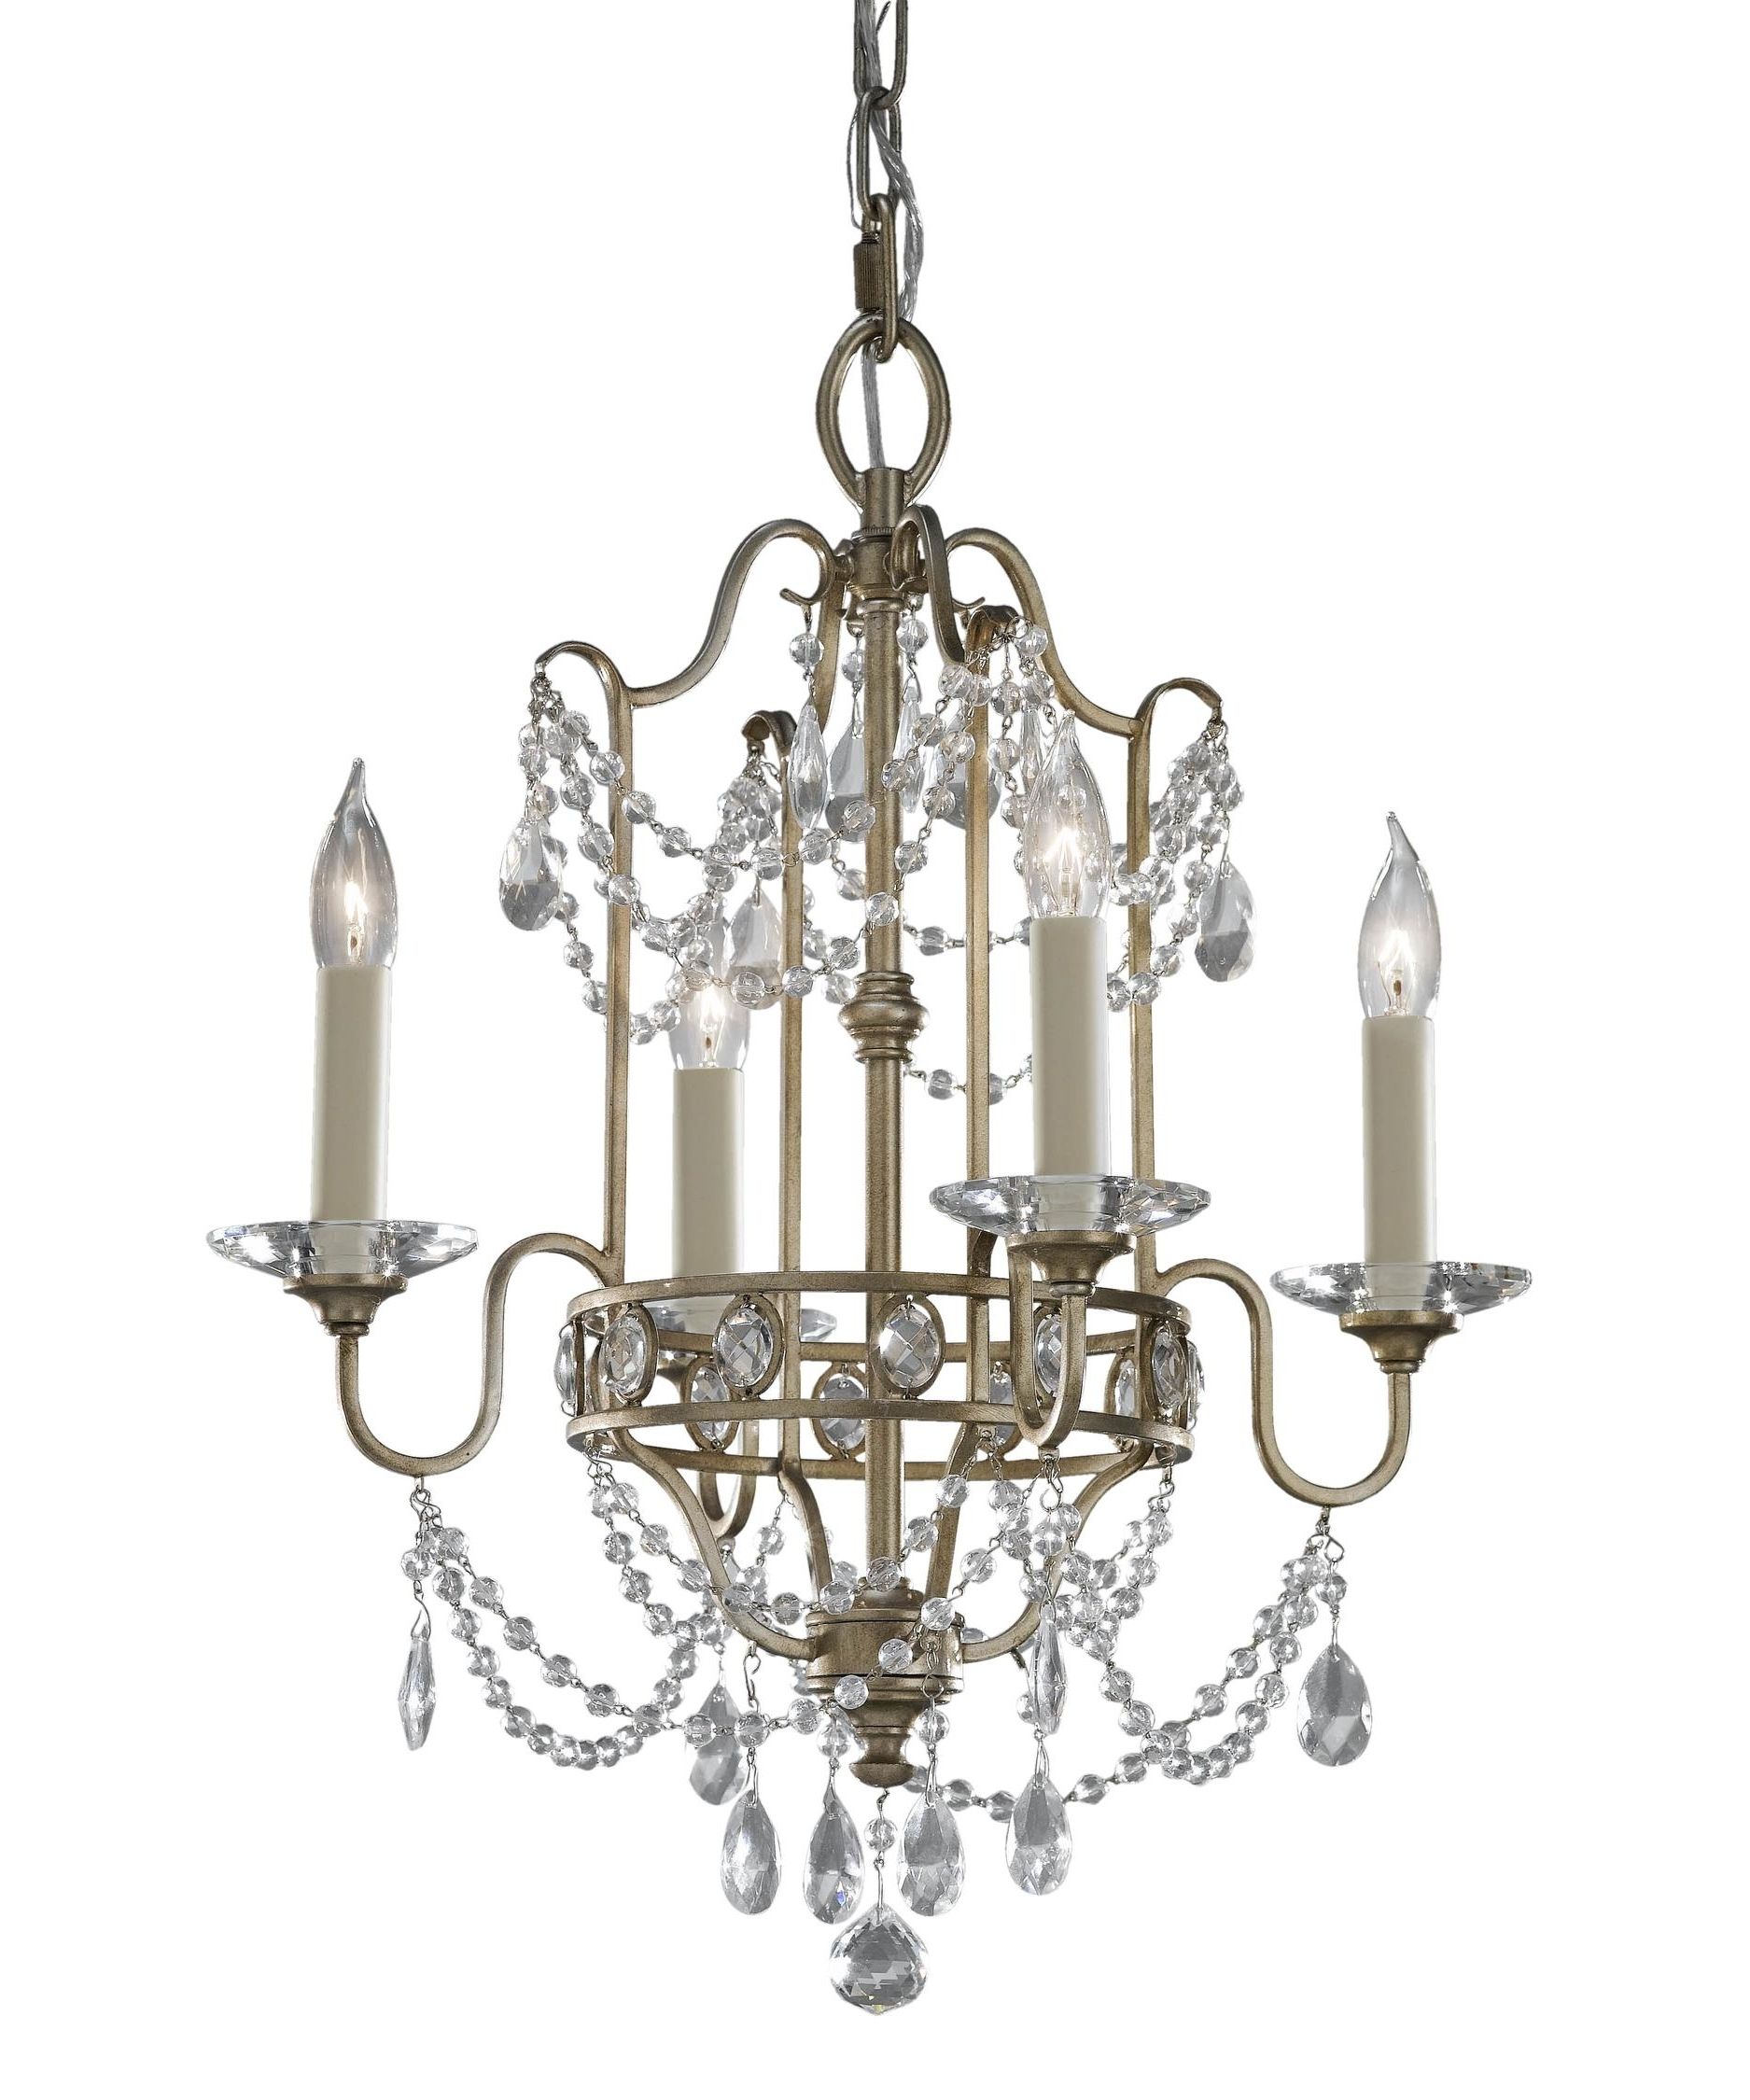 Murray Feiss F2476 4 Gianna 16 Inch Wide 4 Light Mini Chandelier Intended For Popular Gianna Mini Chandeliers (View 1 of 15)